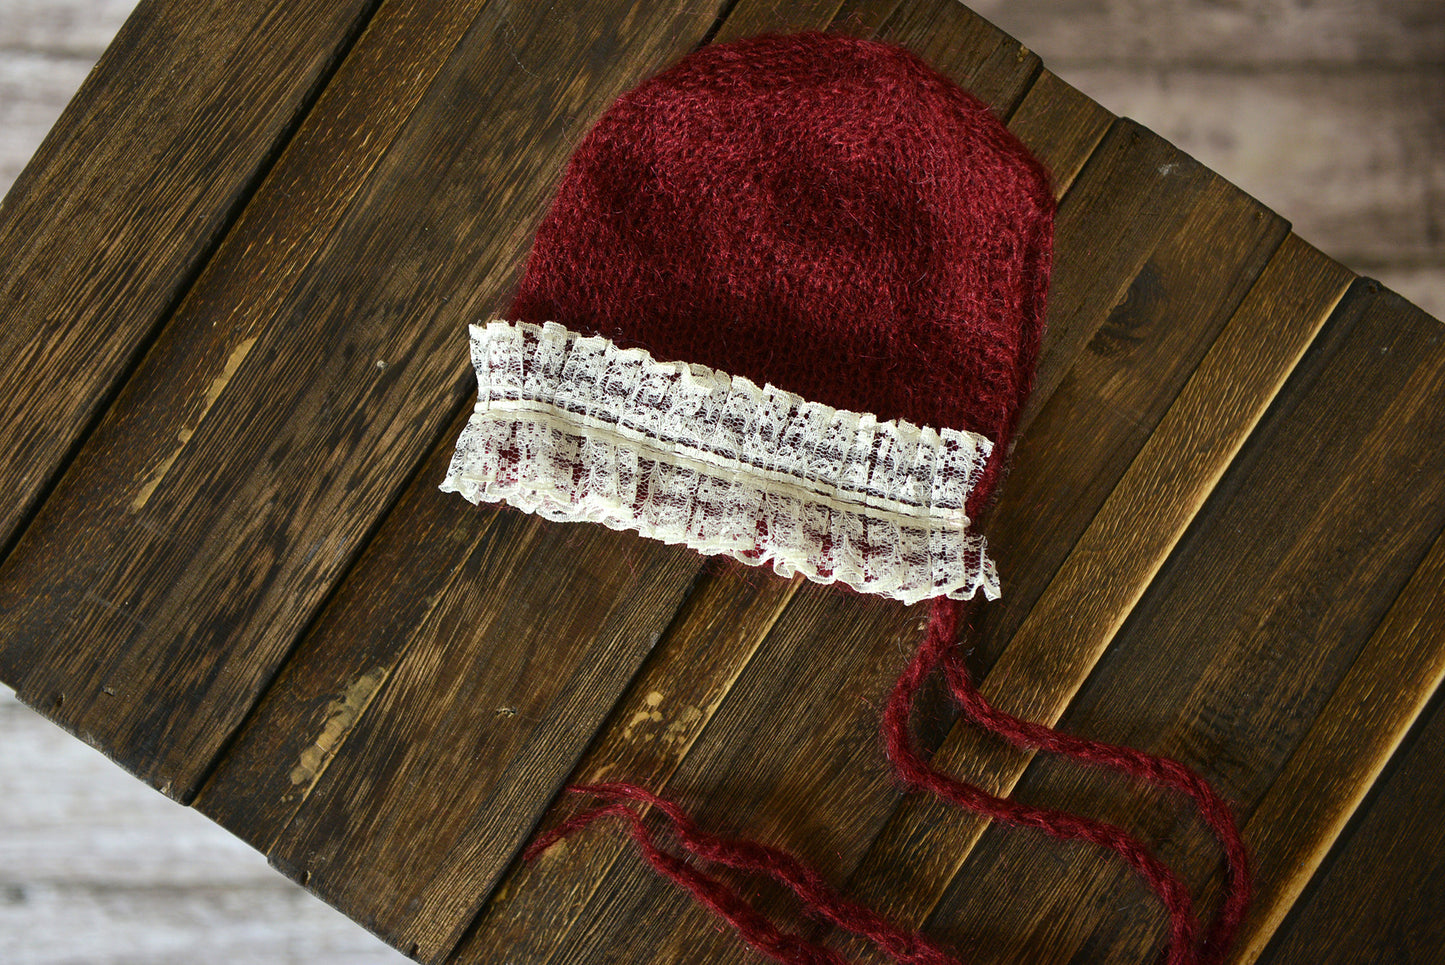 Mohair Bonnet with Lace - Burgundy-Newborn Photography Props